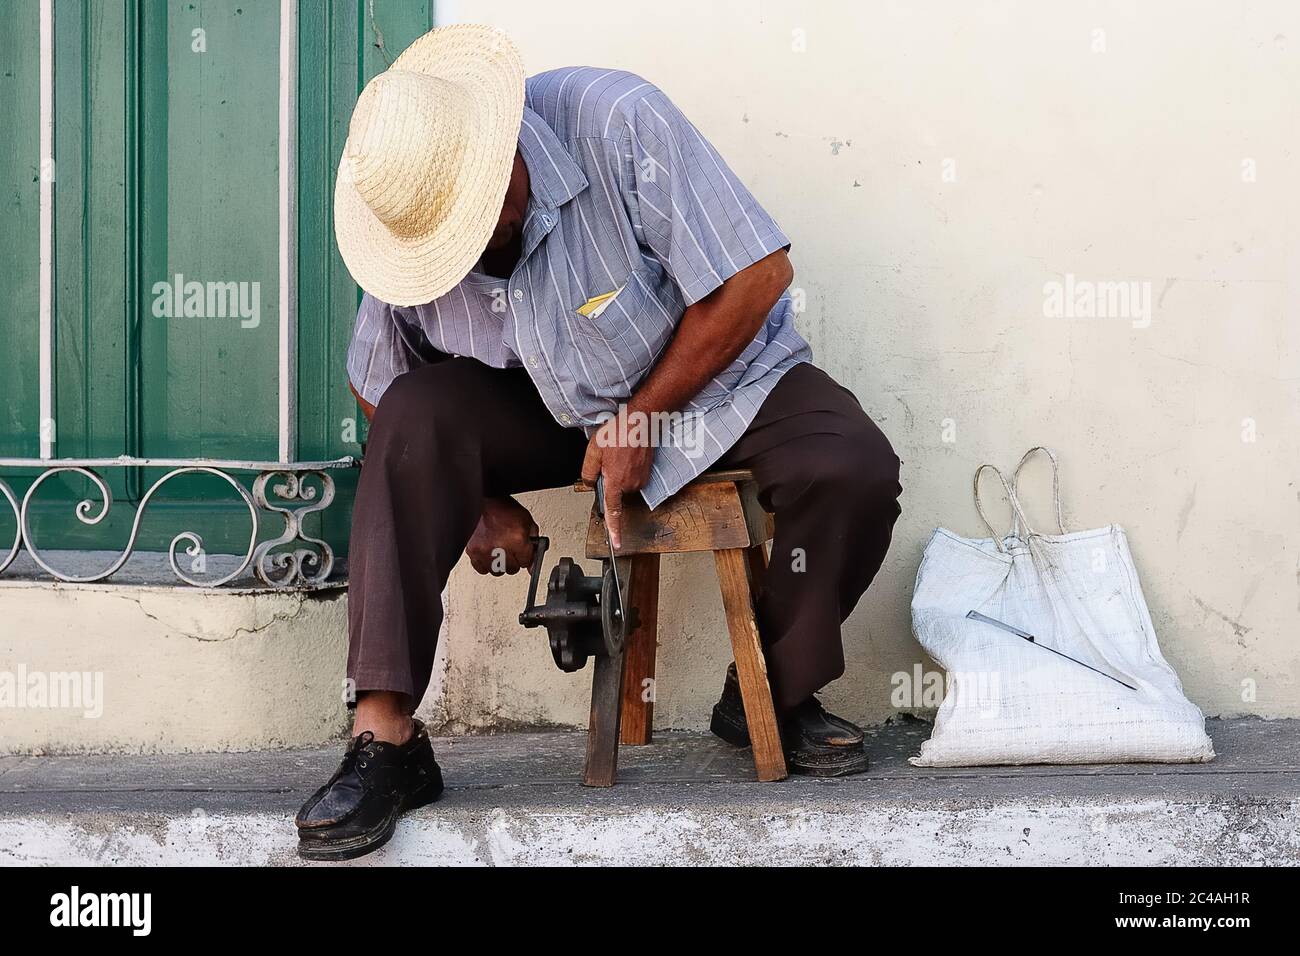 The photograph is showing the street life on Cuba, the man is sharpening knives on the pavement in Santiago de Cuba, Cuba Stock Photo